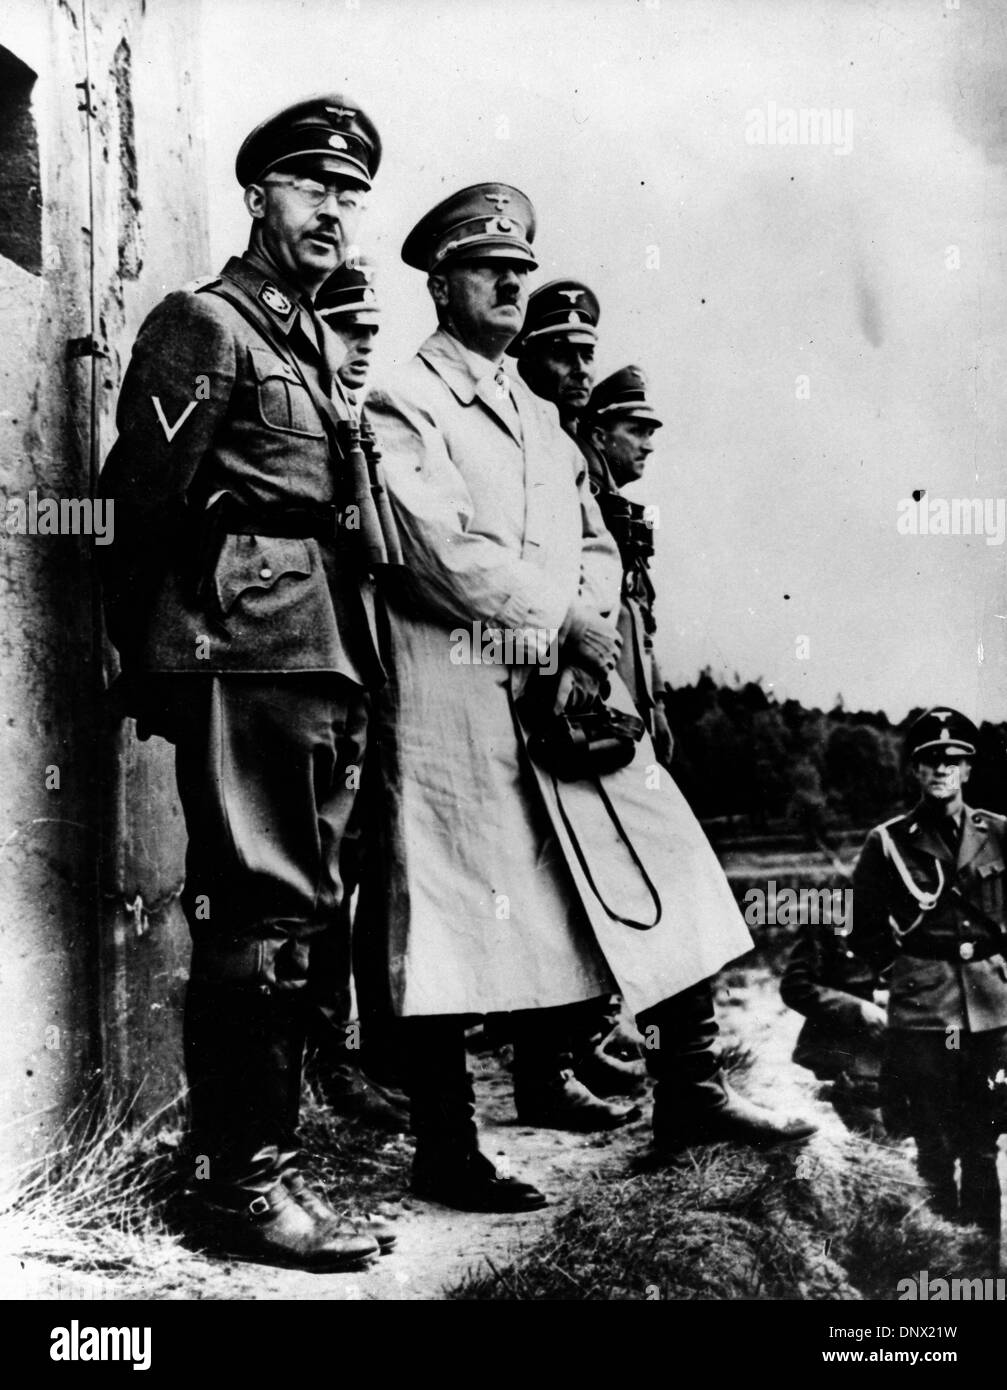 Oct. 20, 1938 - Berlin, Germany - ADOLF HITLER with HEINRICH HIMMLER. Adolf Hitler (April 20, 1889-April 30, 1945) was the Fuhrer und Reichskanzler (Leader and Imperial chancellor) of Germany from 1933 to his death. He was leader of the National Socialist German Workers Party (NSDAP), better known as the Nazi Party. At the height of his power, the armies of Nazi Germany and its Axi Stock Photo